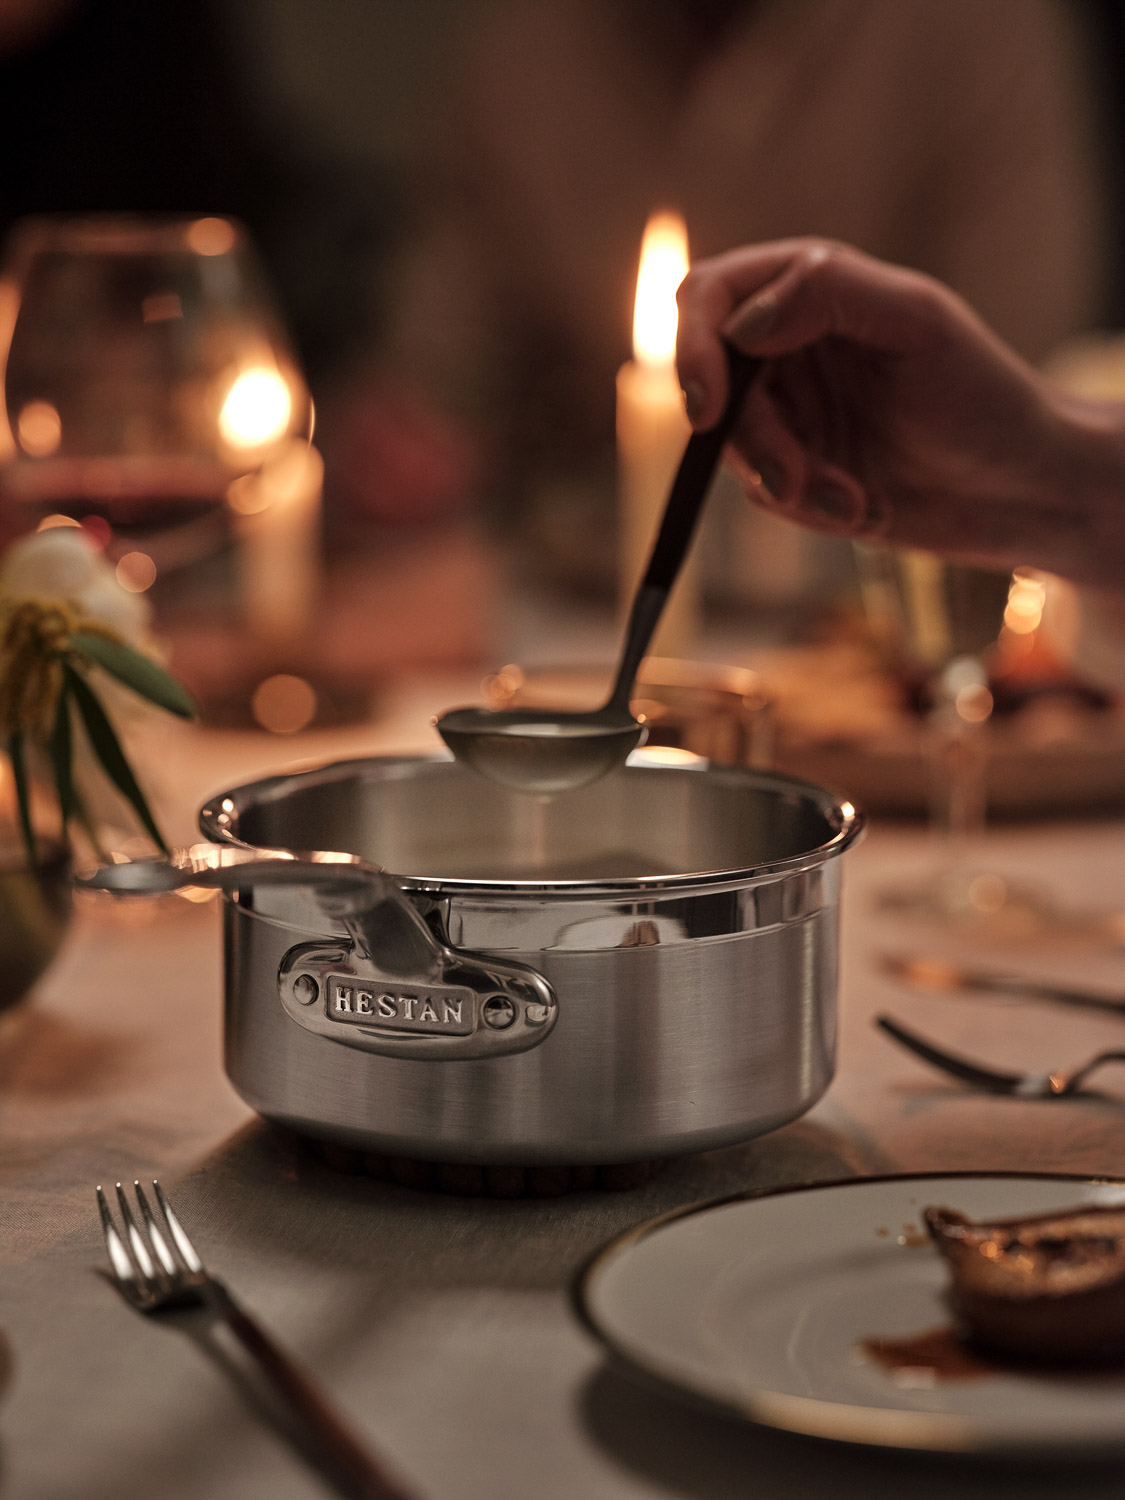 Serving pan on Candle-lit table with serving ladle 